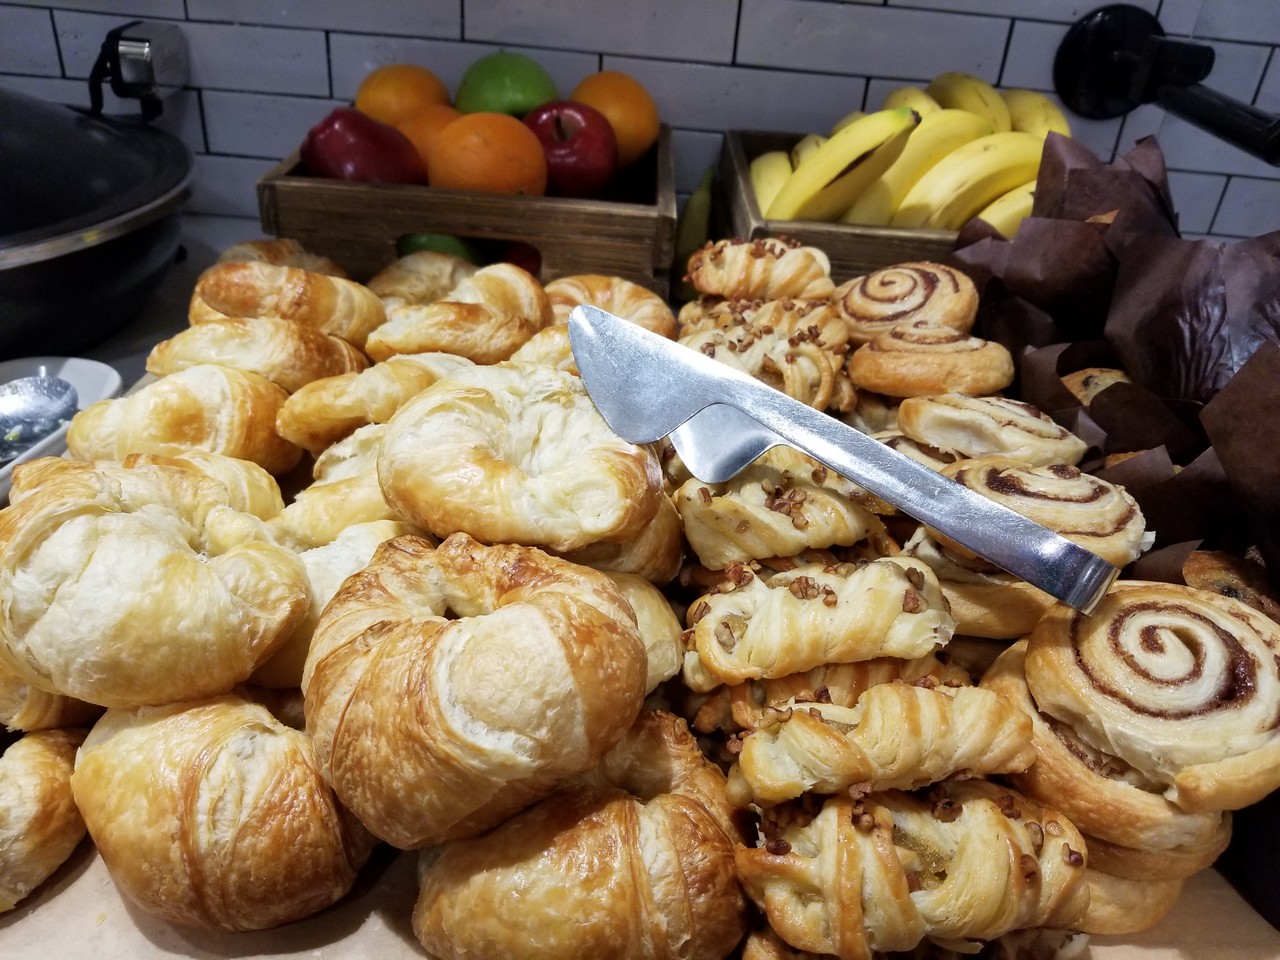 a table full of pastries and fruits